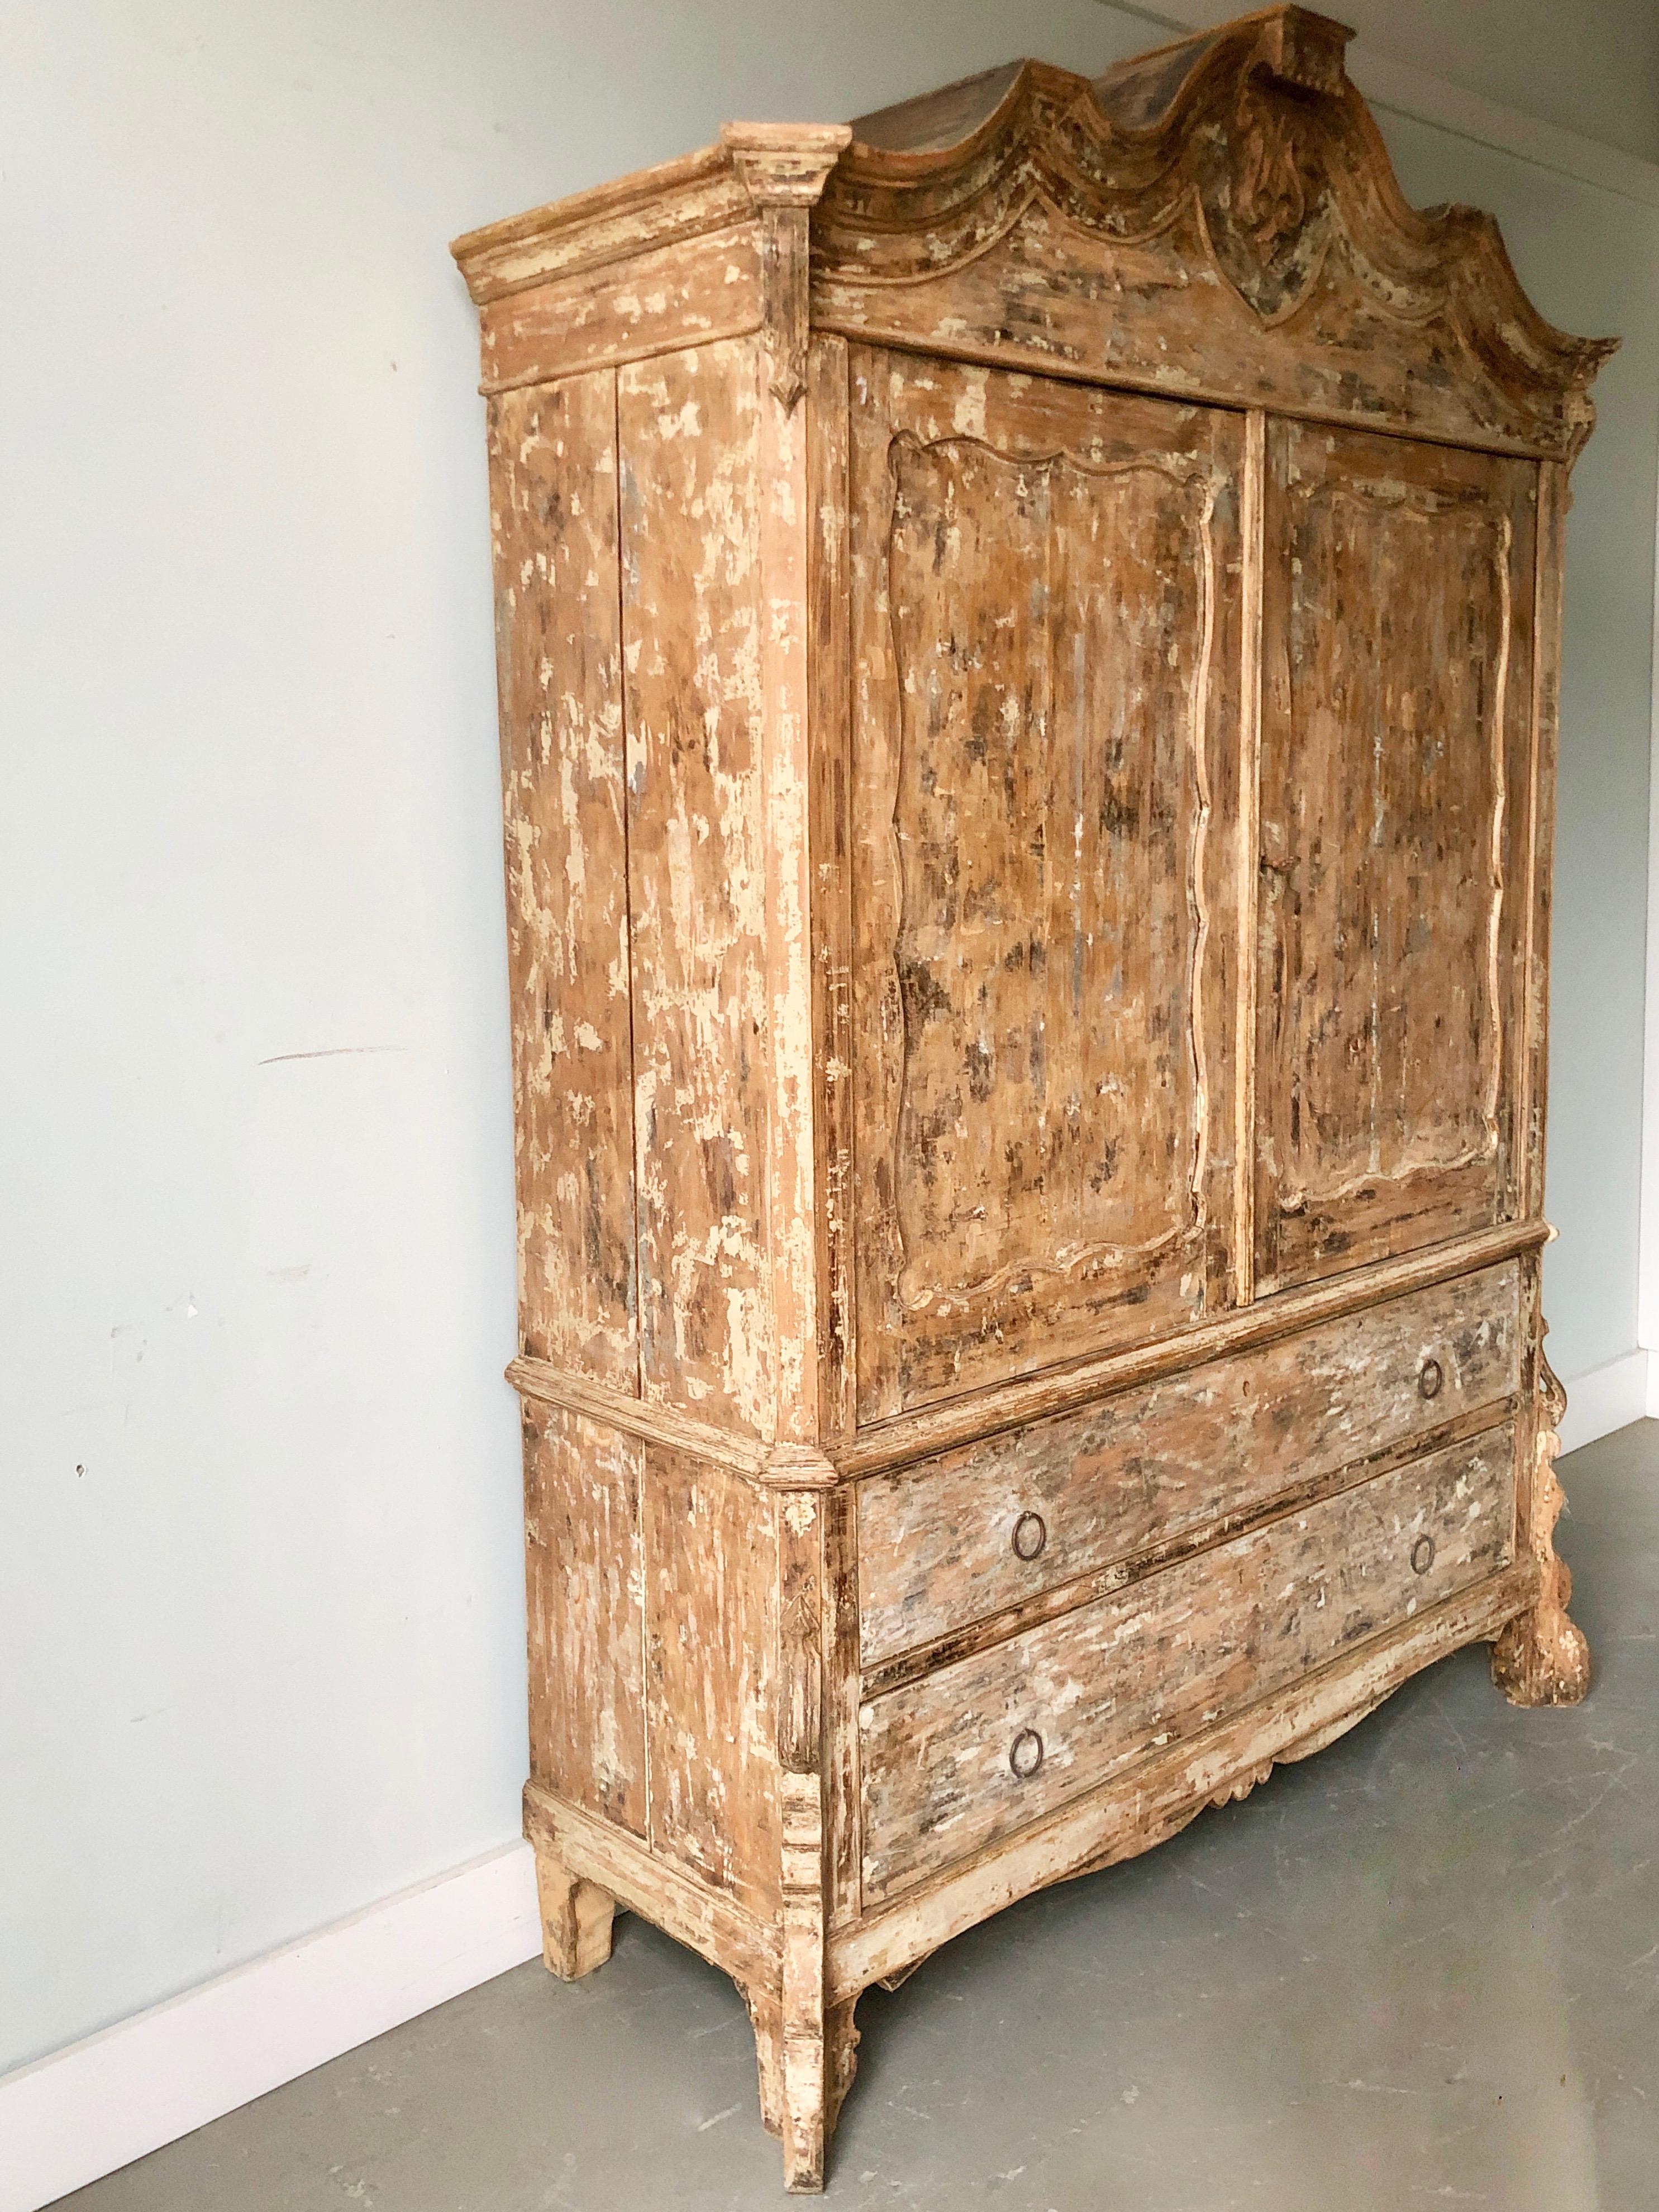 19th century Dutch oak cabinet in original worn patina with bonnet shaped pediment with delicate carvings and two large drawers with scalloped skirt and carved feet.

      